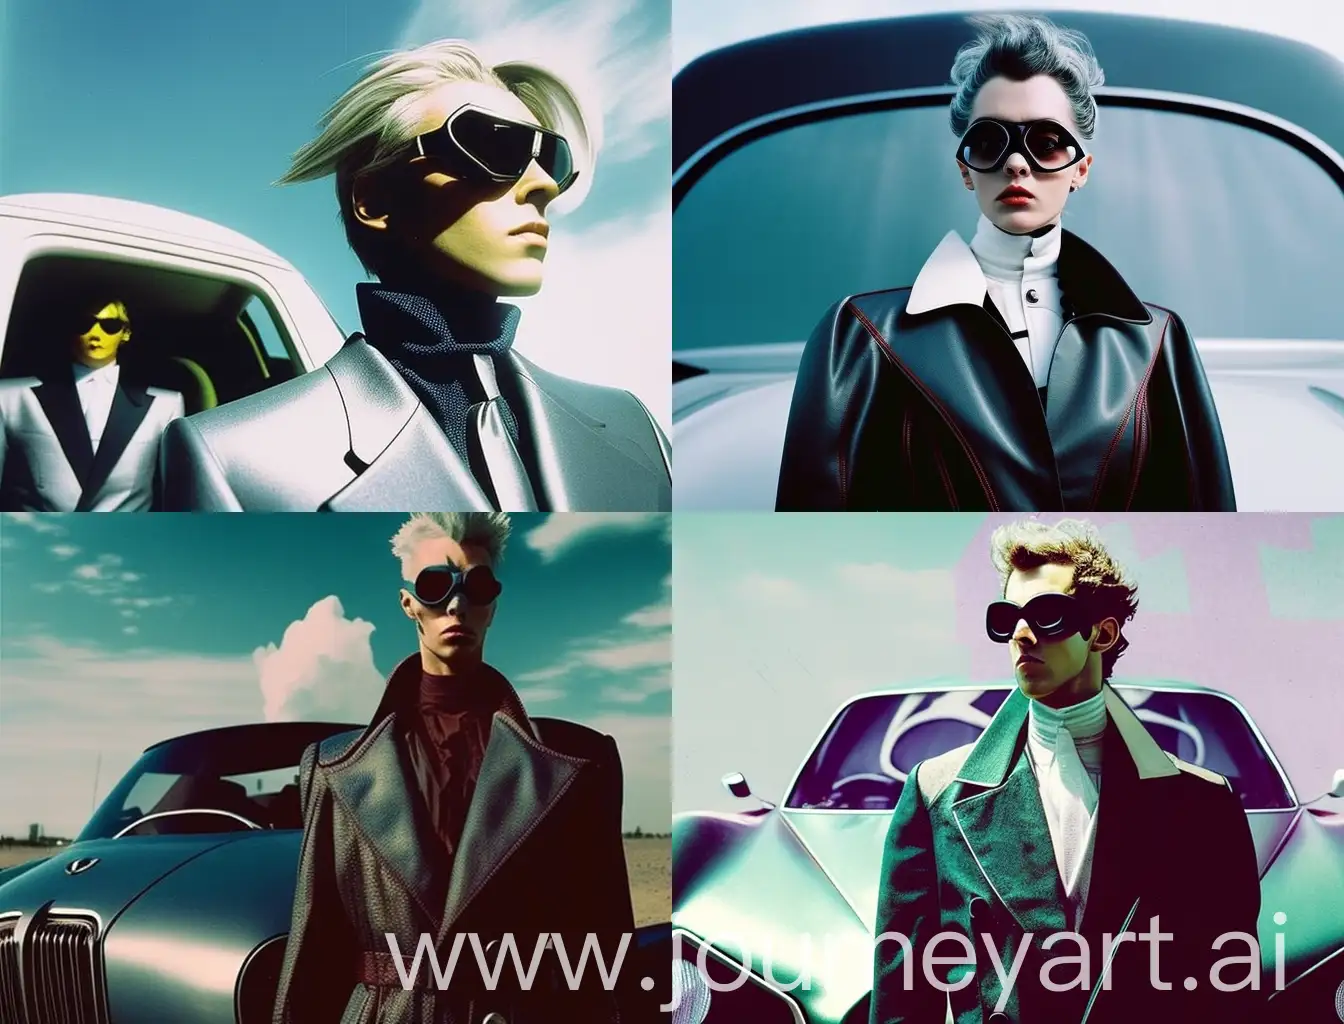 jet 1990s experimental grainy film photography wide angle futuristic car designs fashion clothes designs with minimalist stoic oversized suit with leather harness sunglasses earbuds perfect faces renaissance painting